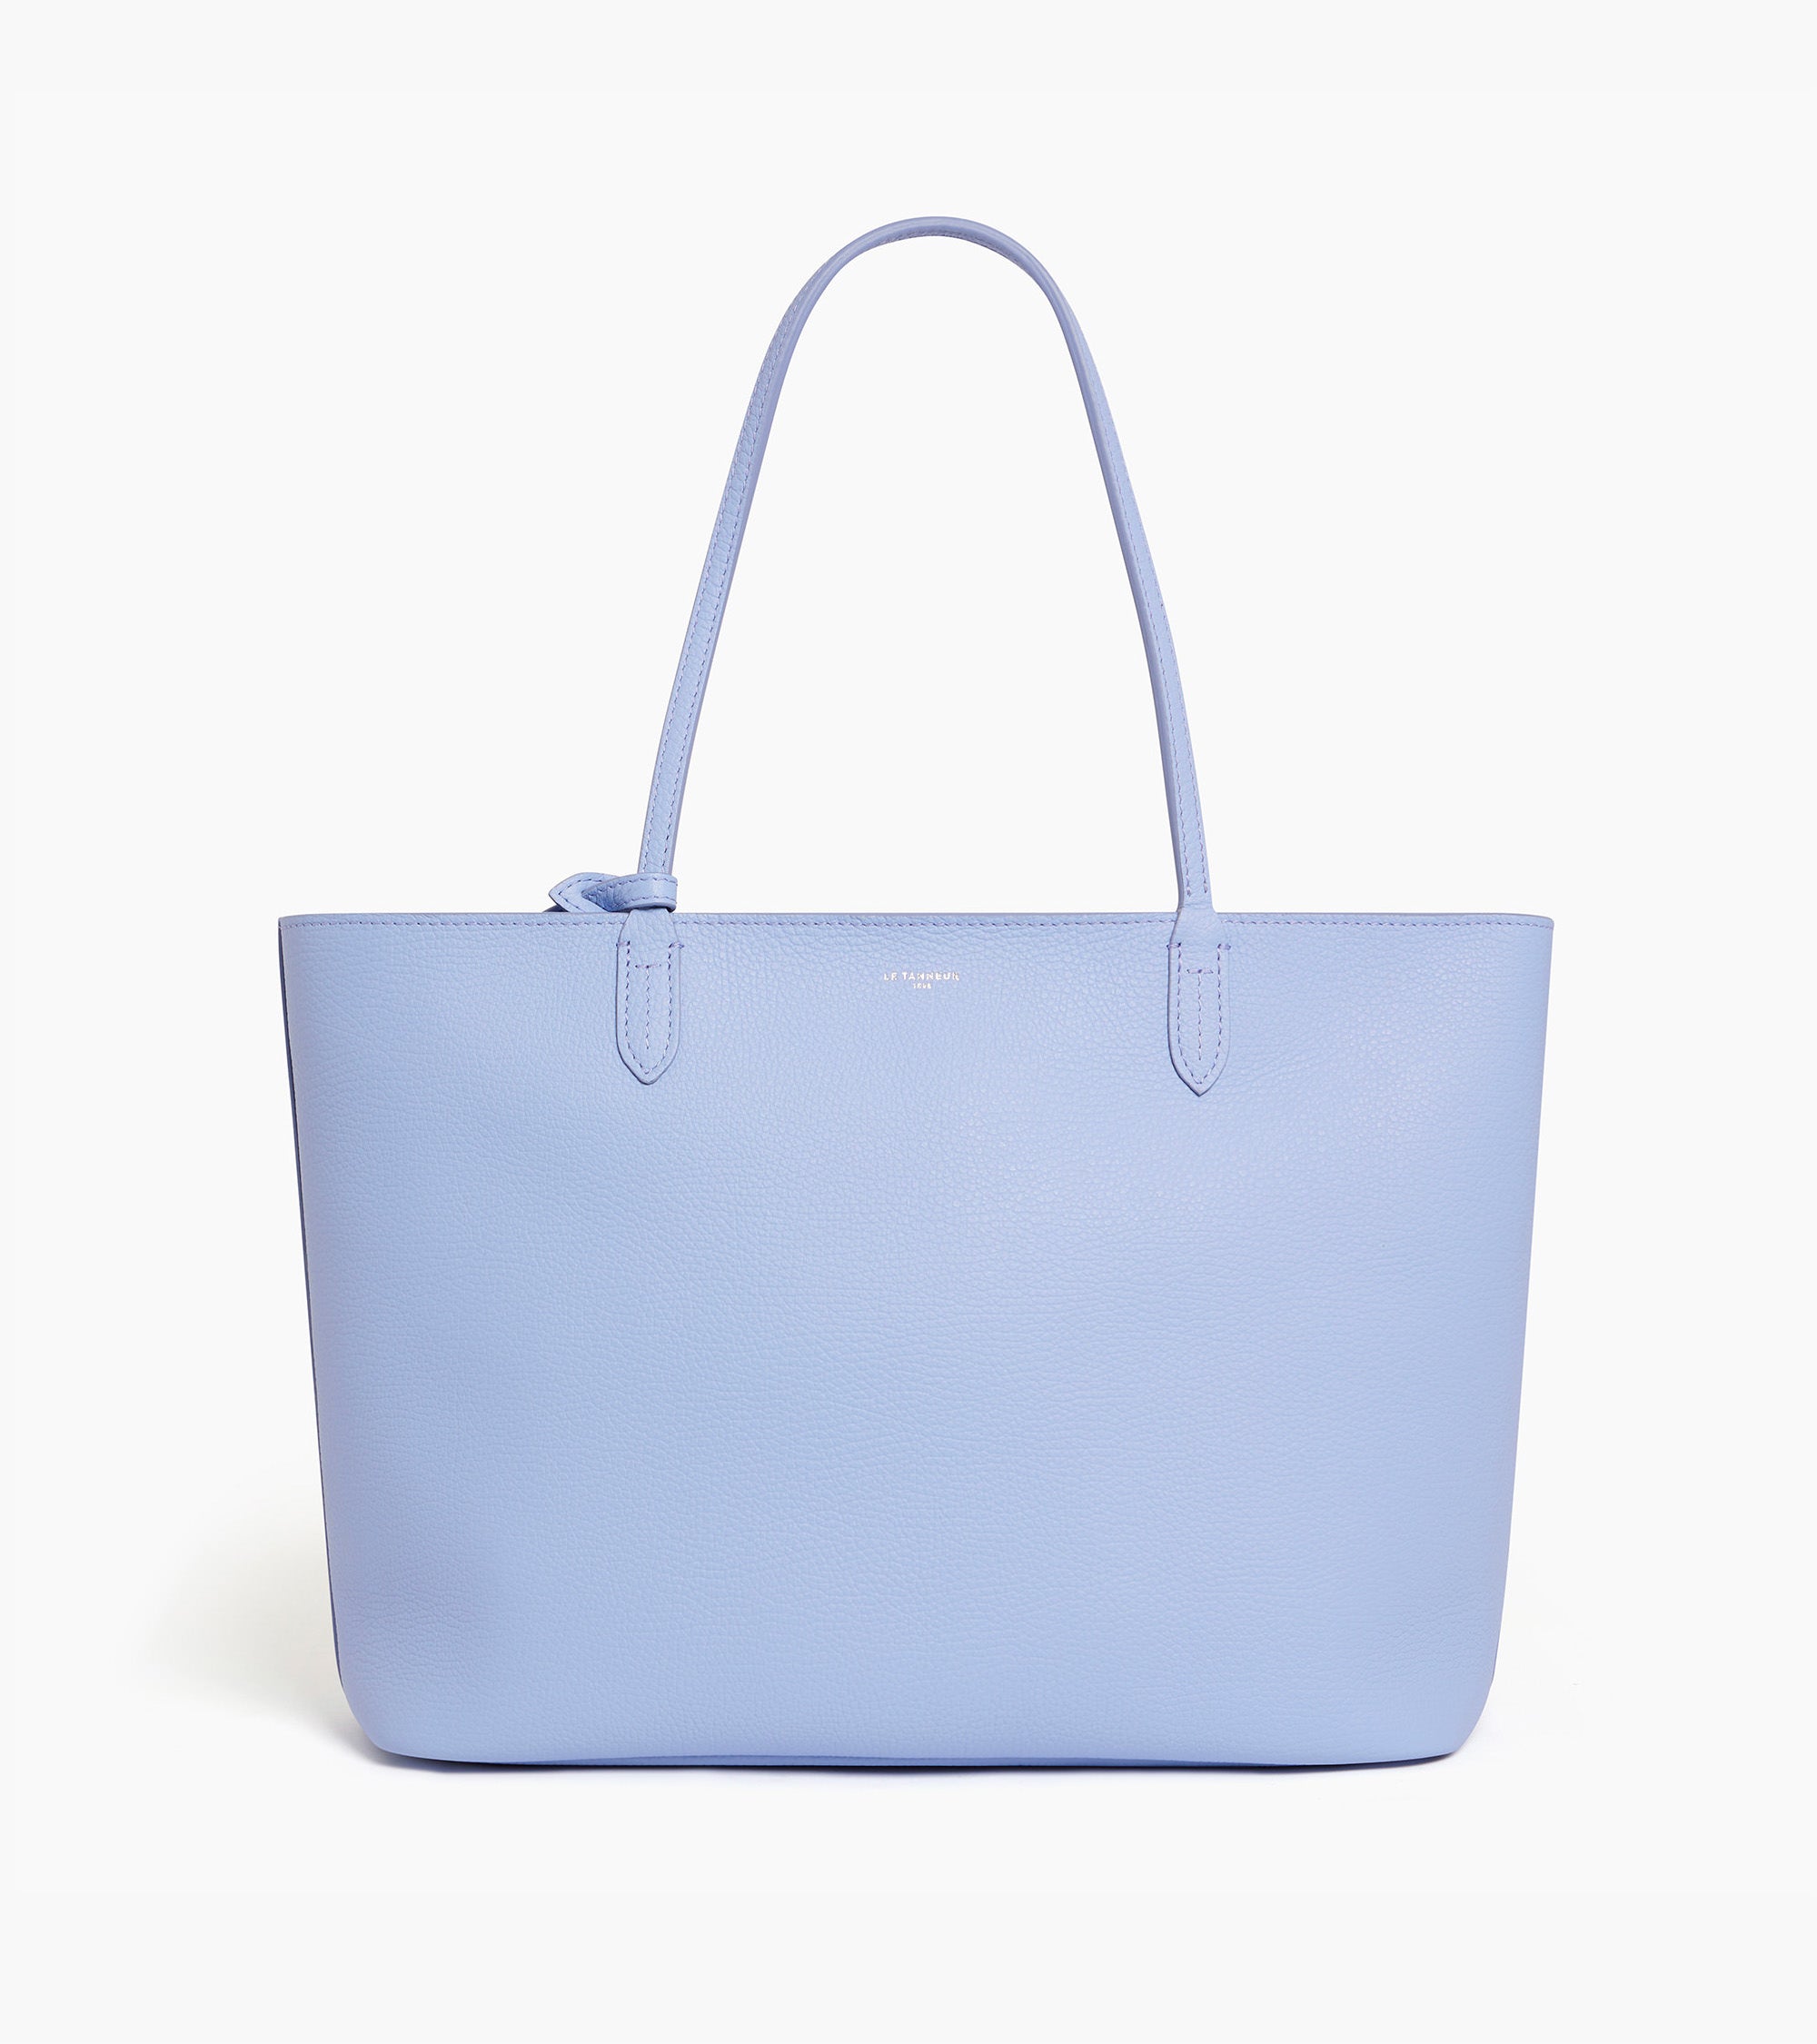 Louise large tote in pebbled leather